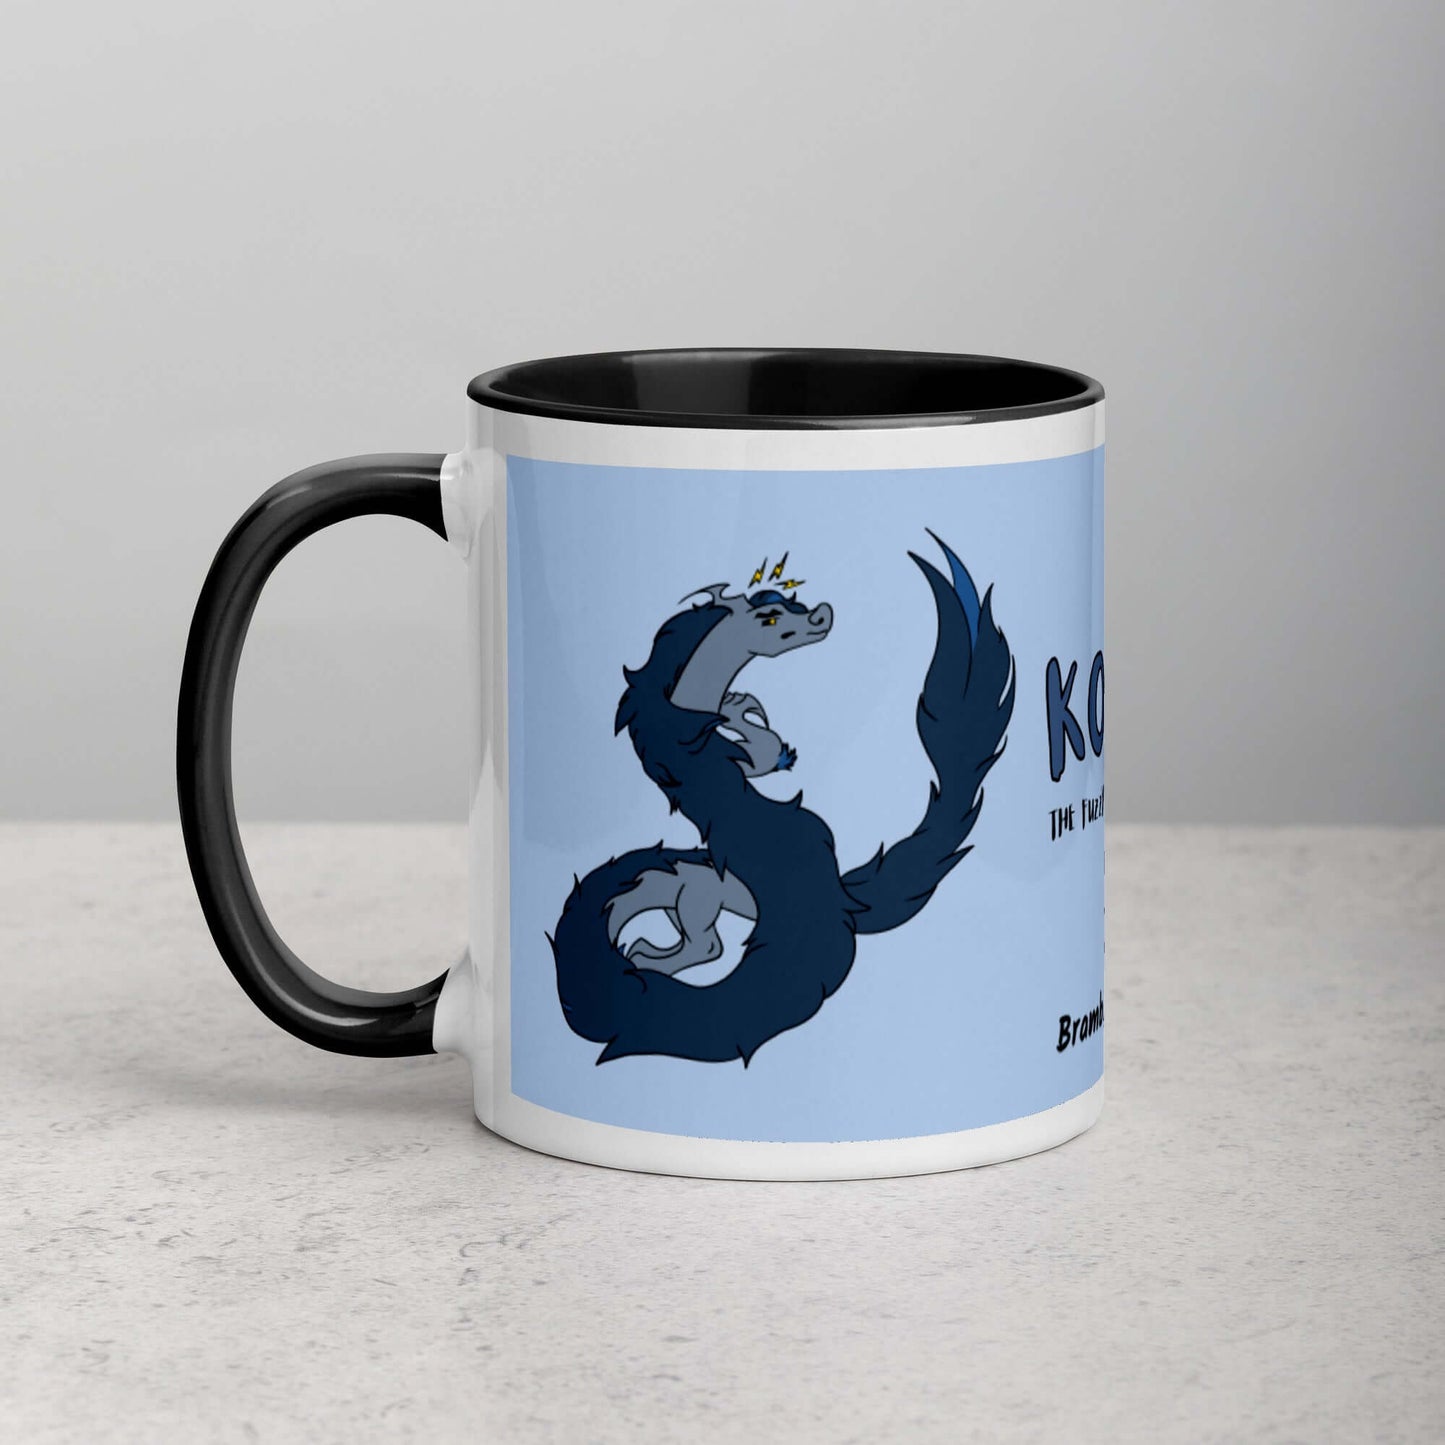 11 ounce ceramic mug featuring a double-sided image of angry Korvo the Fuzzy Noodle dragon against a light blue background.  Black inside and handle. Sitting on tabletop.